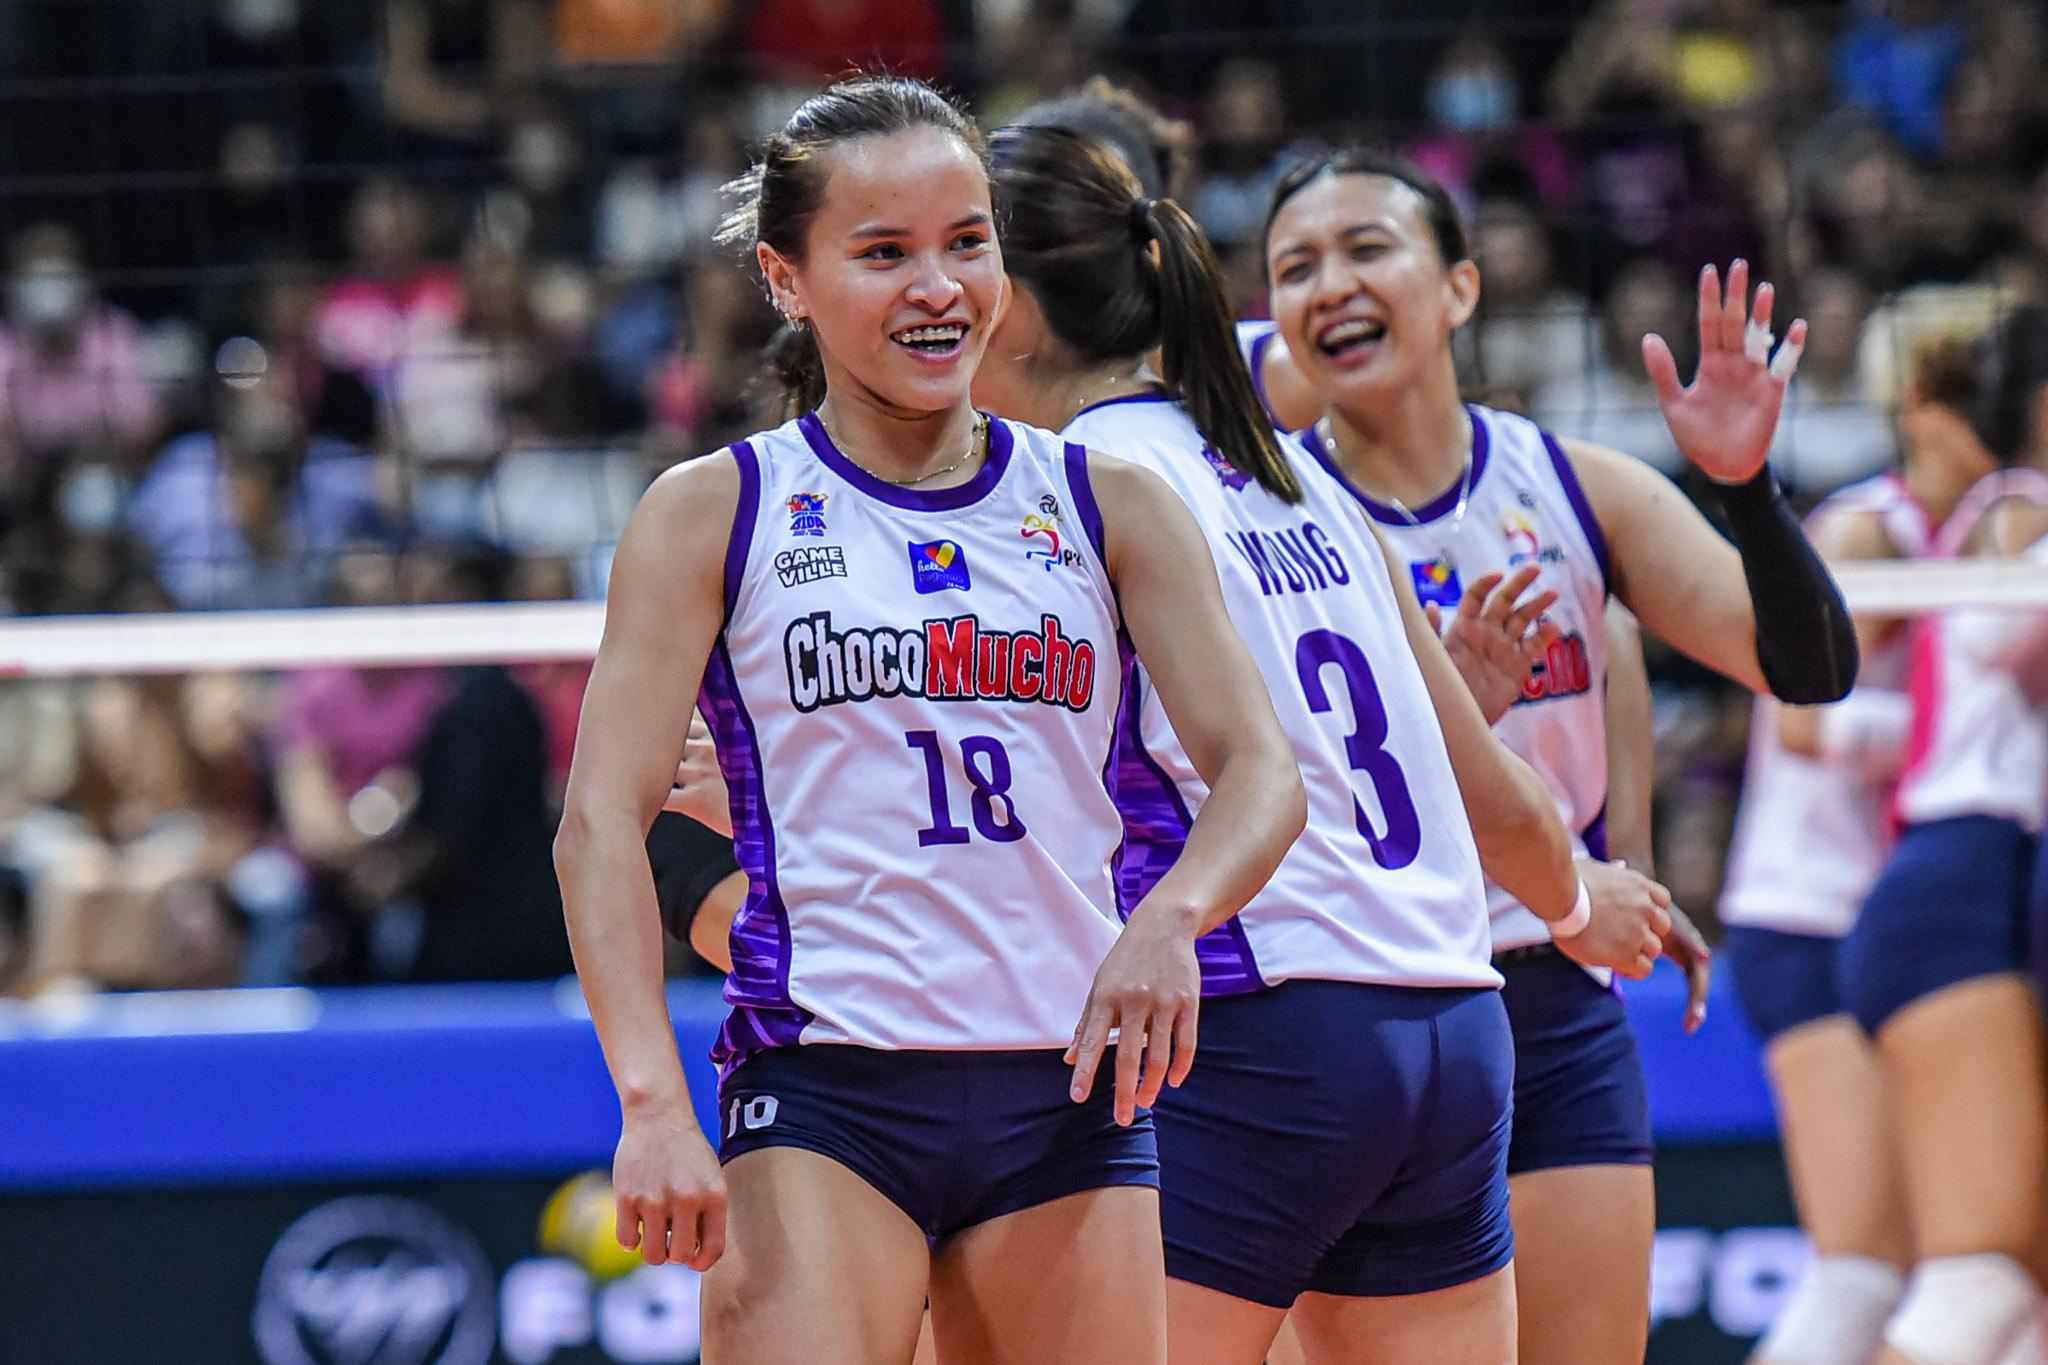 PVL: Sisi Rondina of the Choco Mucho Flying Titans